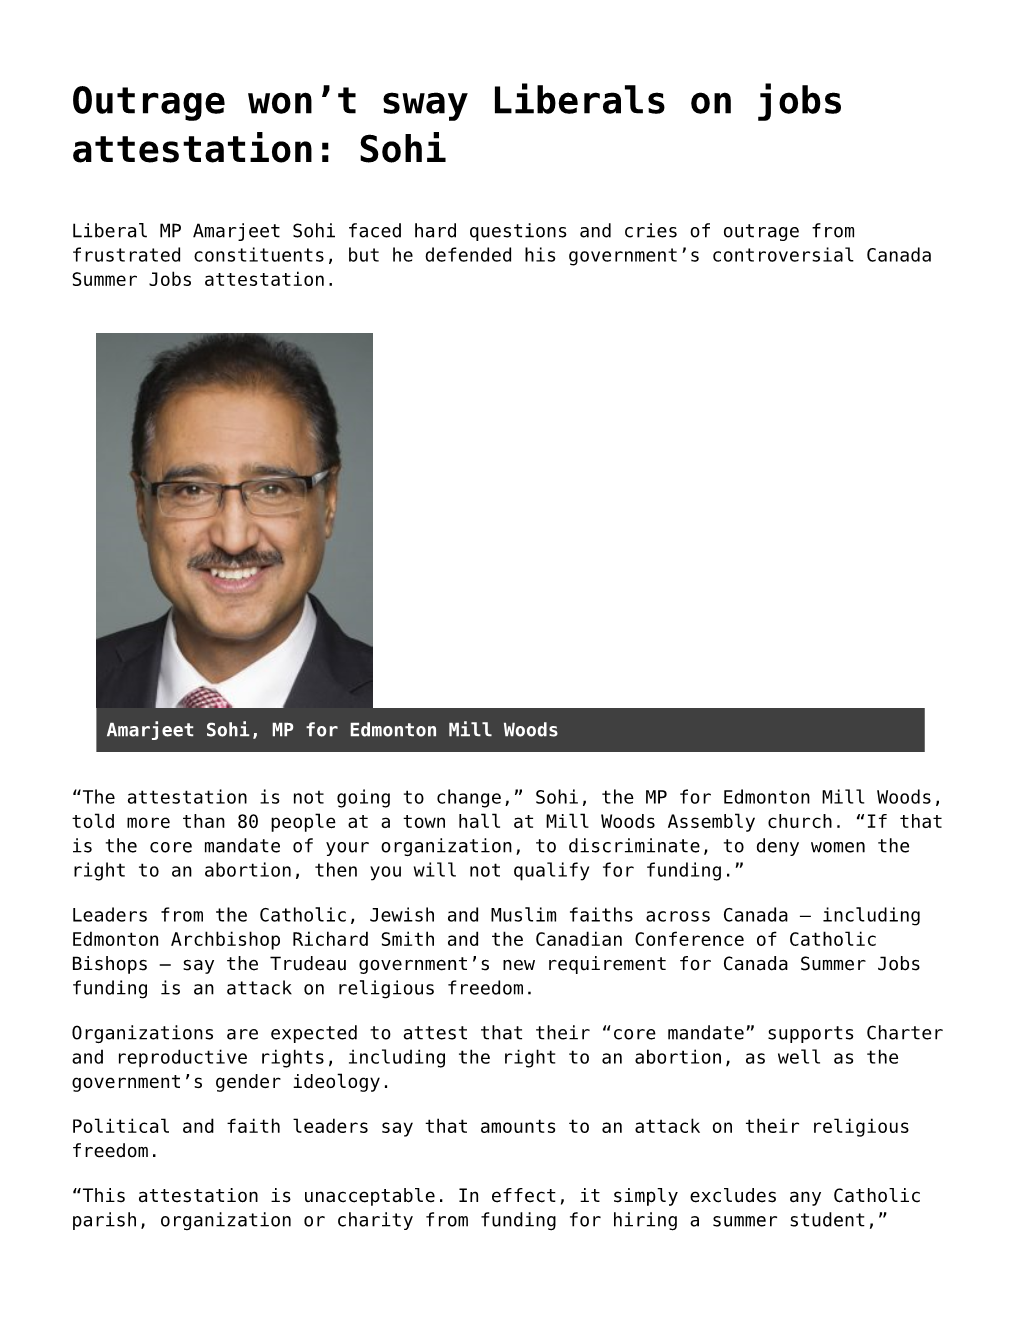 Outrage Won't Sway Liberals on Jobs Attestation: Sohi